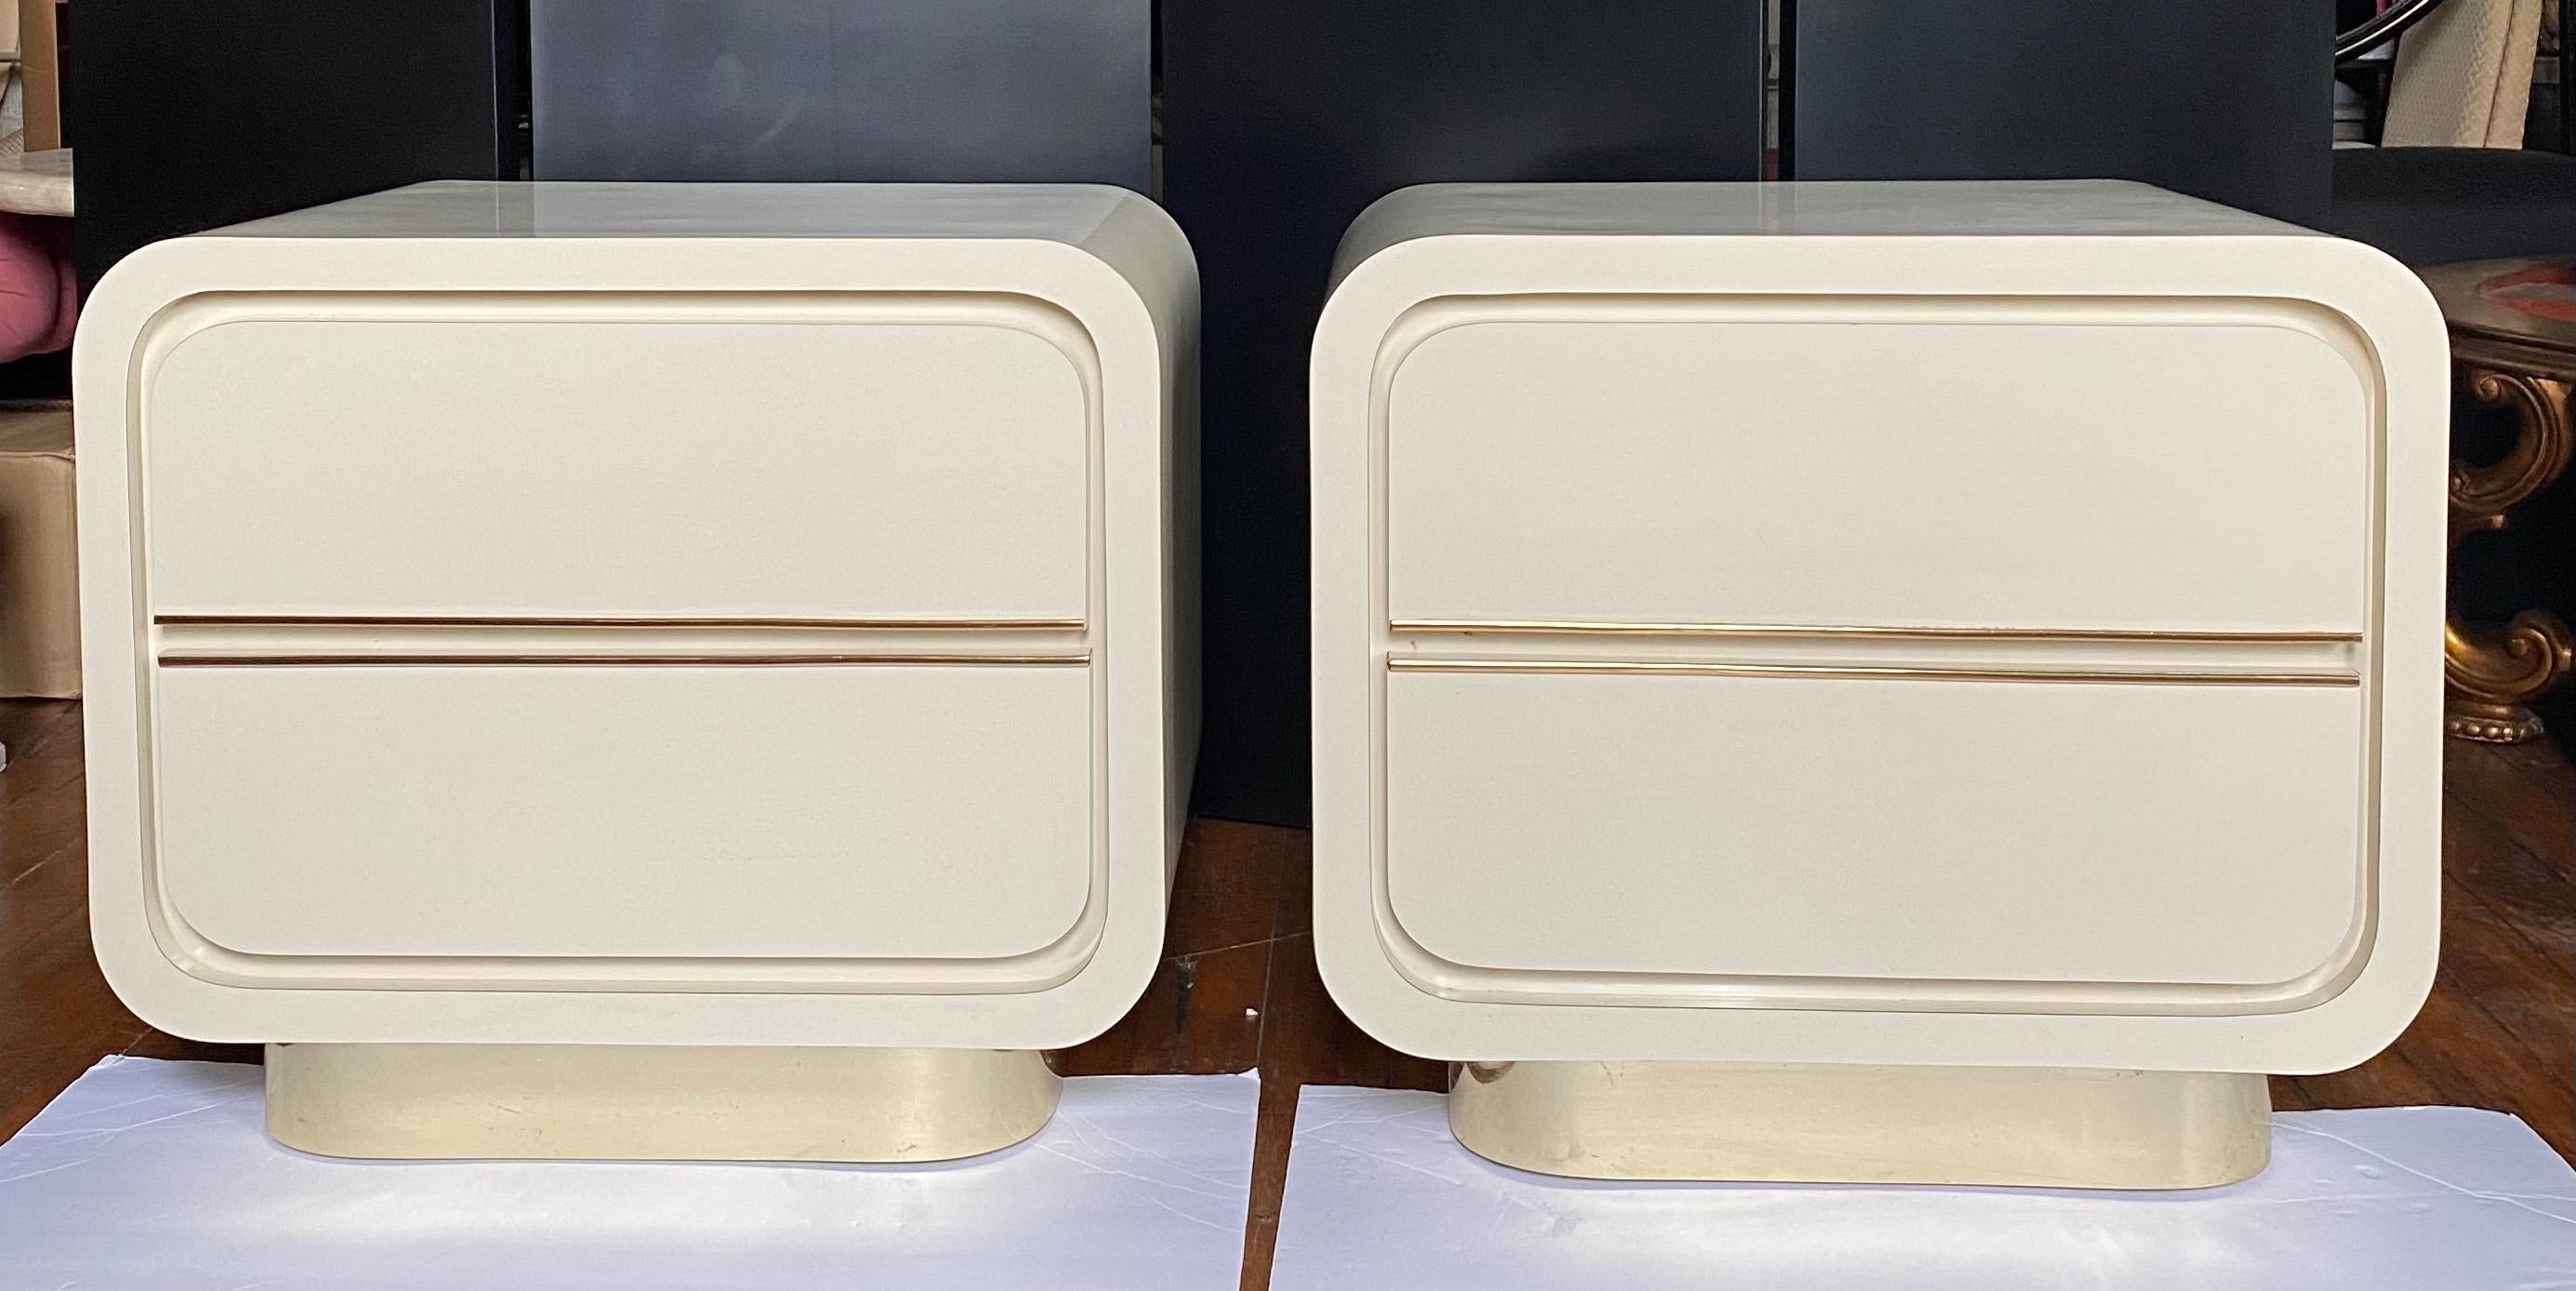 Pair of Post Modern two drawer cream gloss lacquer nightstands. These sculptural Art Deco style bedside tables feature a cream gloss laminate and reflective gold trim. In the style of Karl Springer.